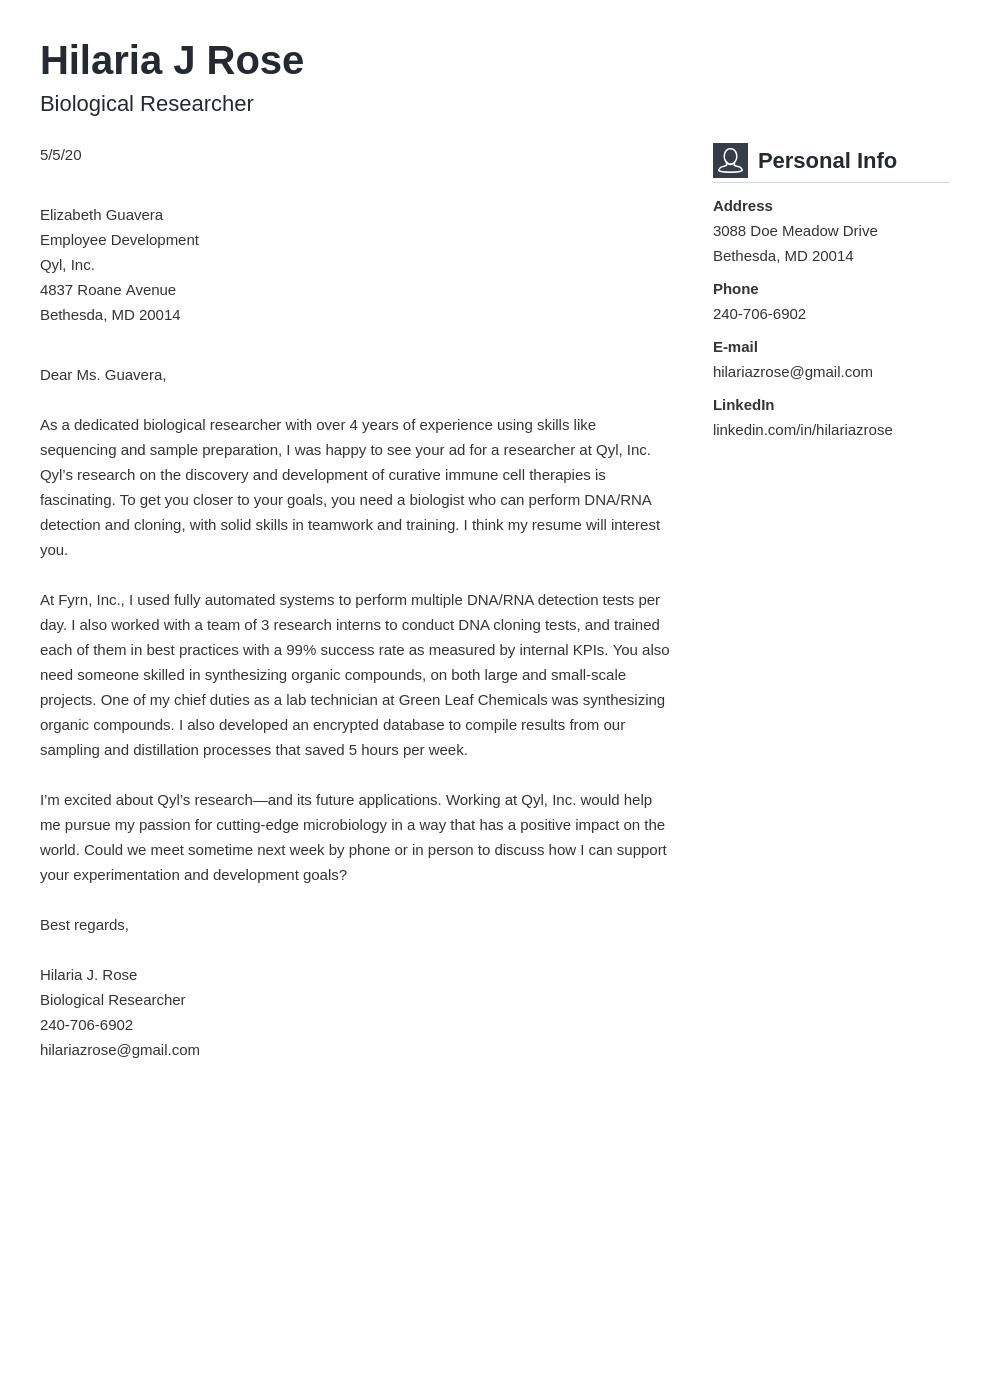 Research Job Cover Letter Examples Good Collection Excellent